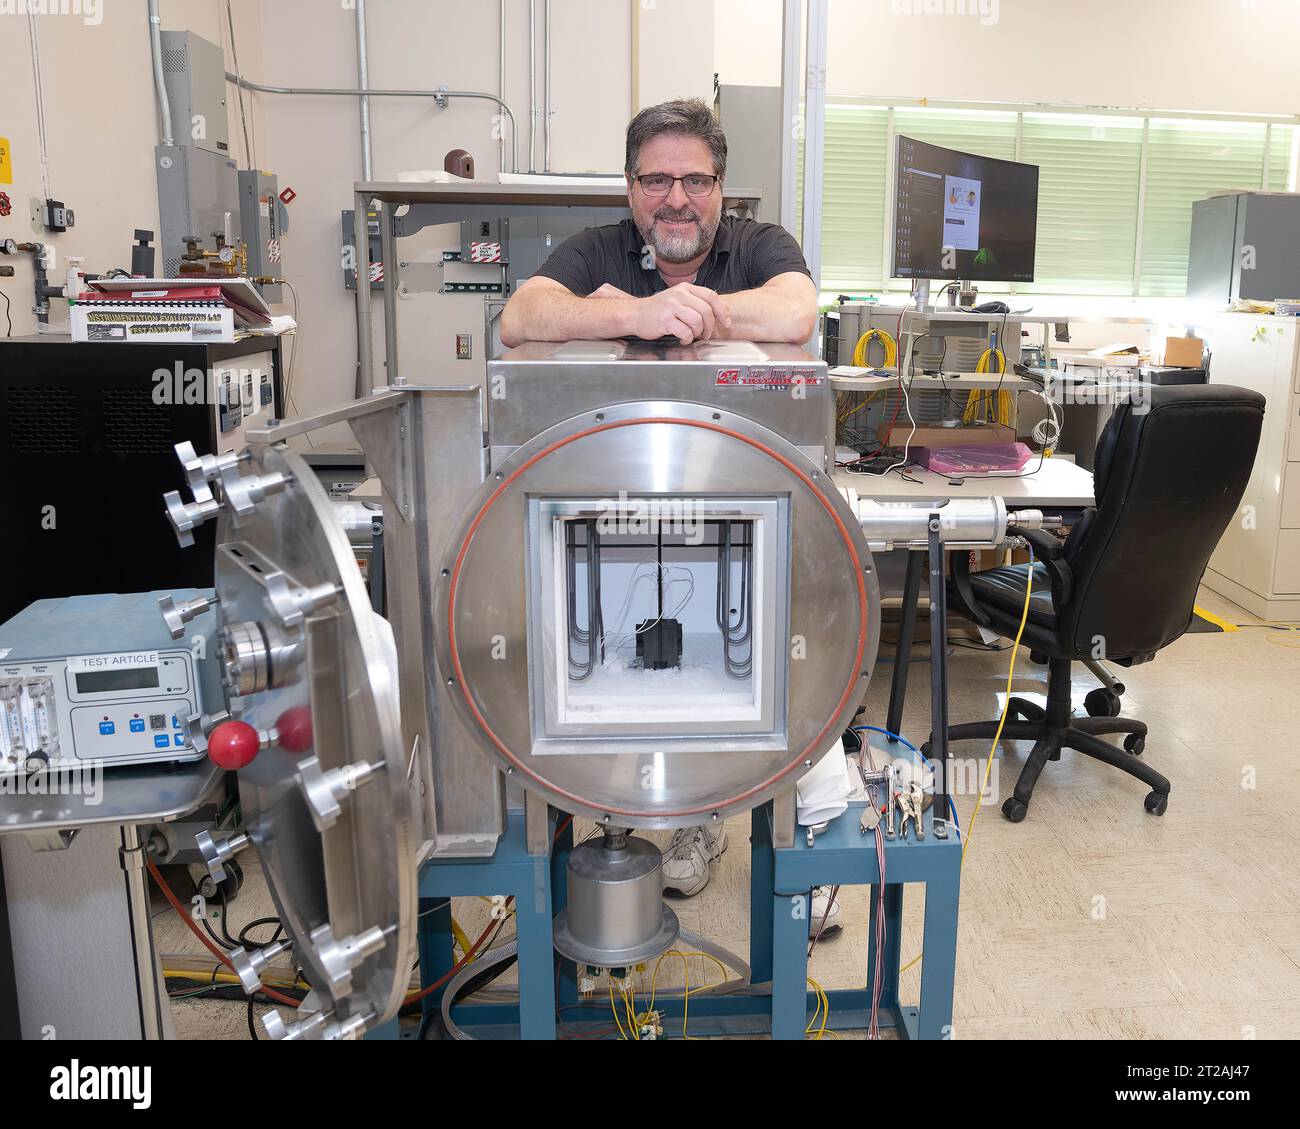 . Anthony piazza, a researcher at NASA’s Armstrong Flight Research center in Edwards, California, works with high-temperature strain sensors. This test article is a bending load bar, which enables high-temperature optical strain sensor research up to 1,800 degrees Fahrenheit. Stock Photo